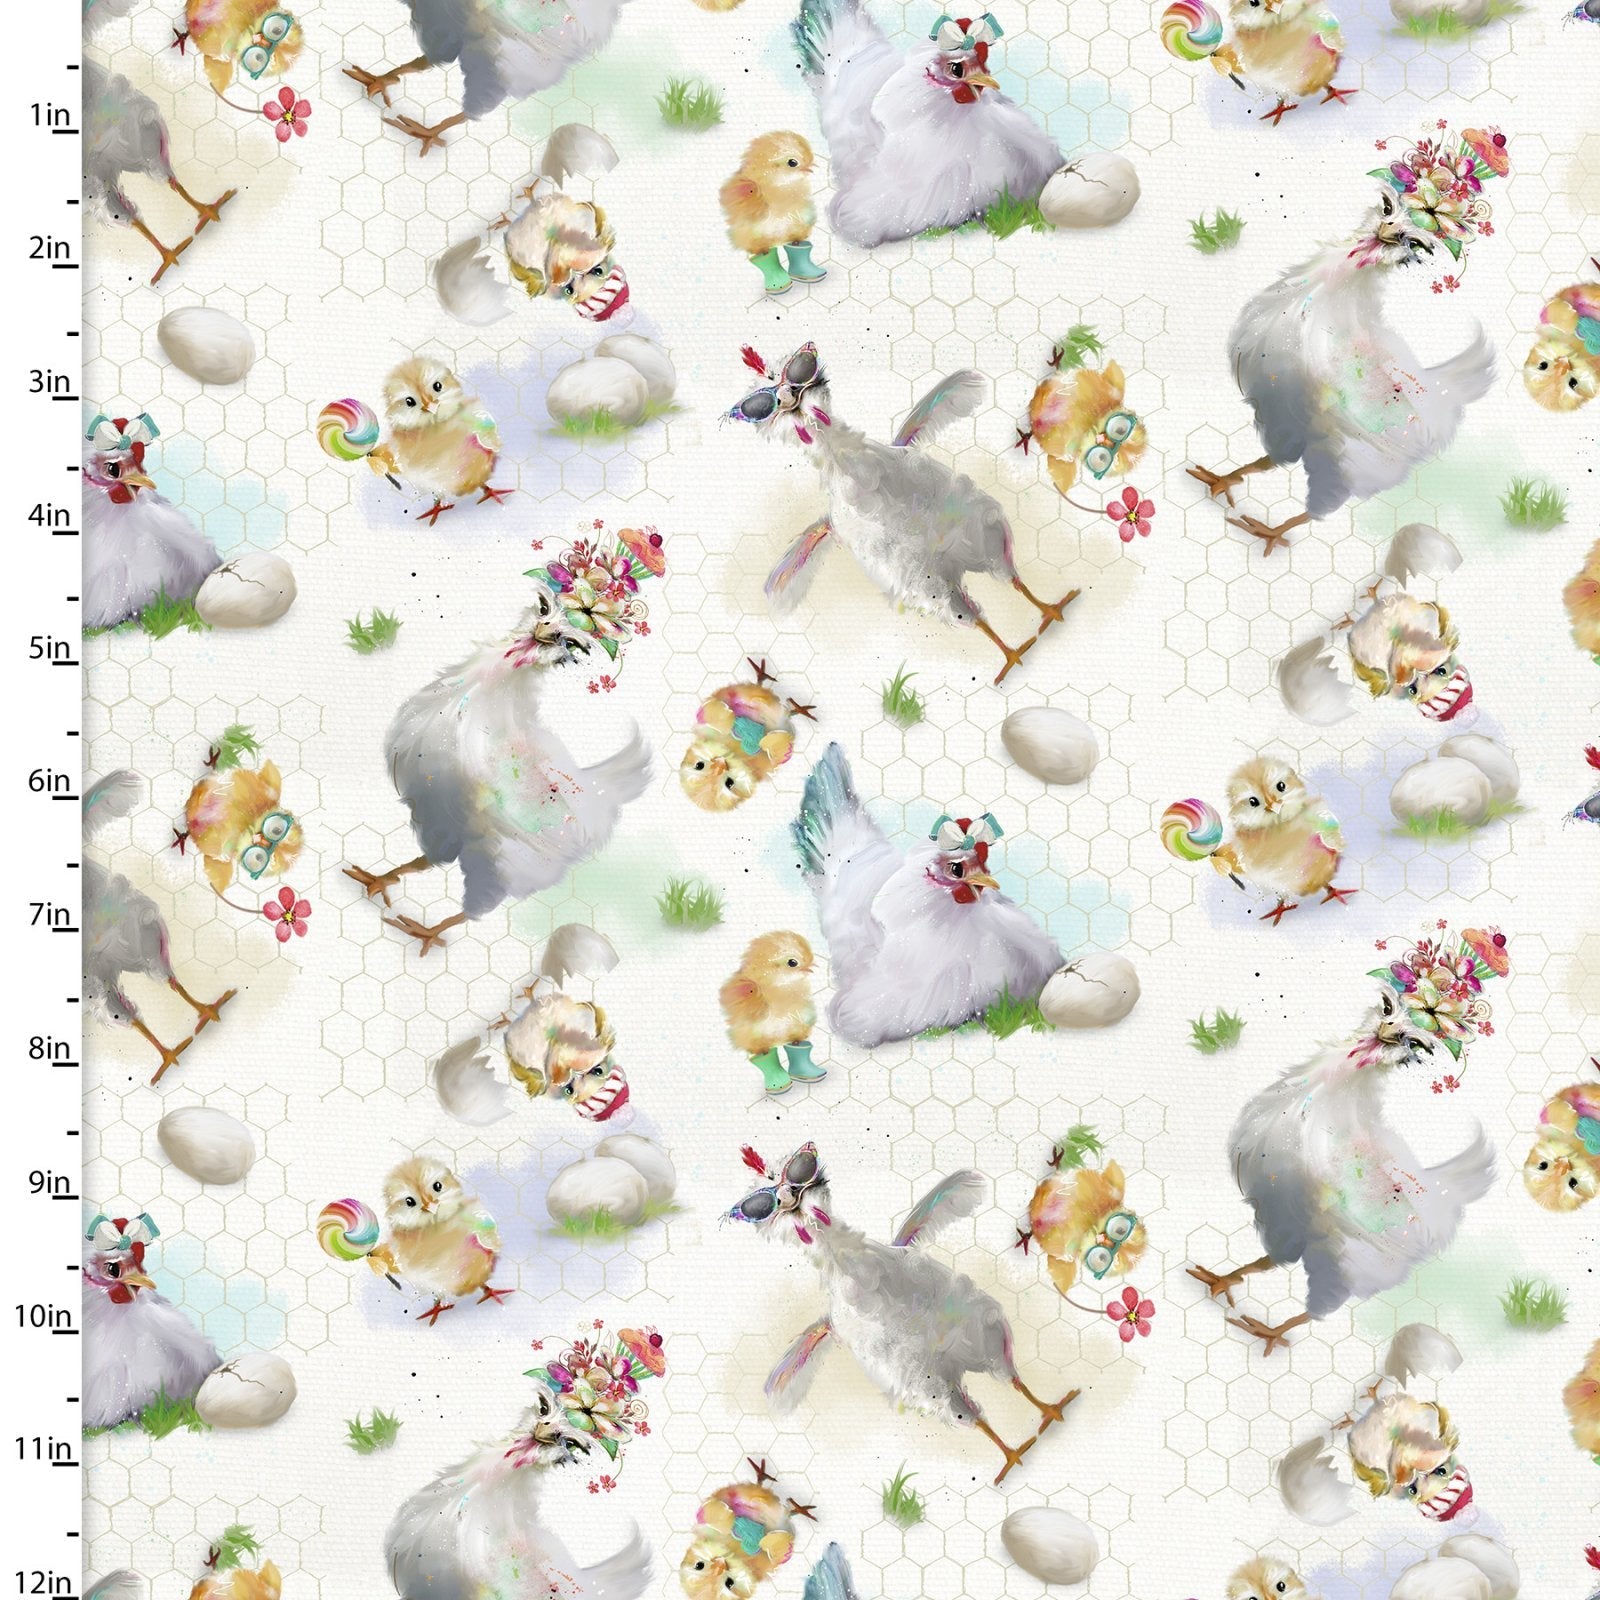 Chickens and chicks on white cotton fabric - 3 Wishes